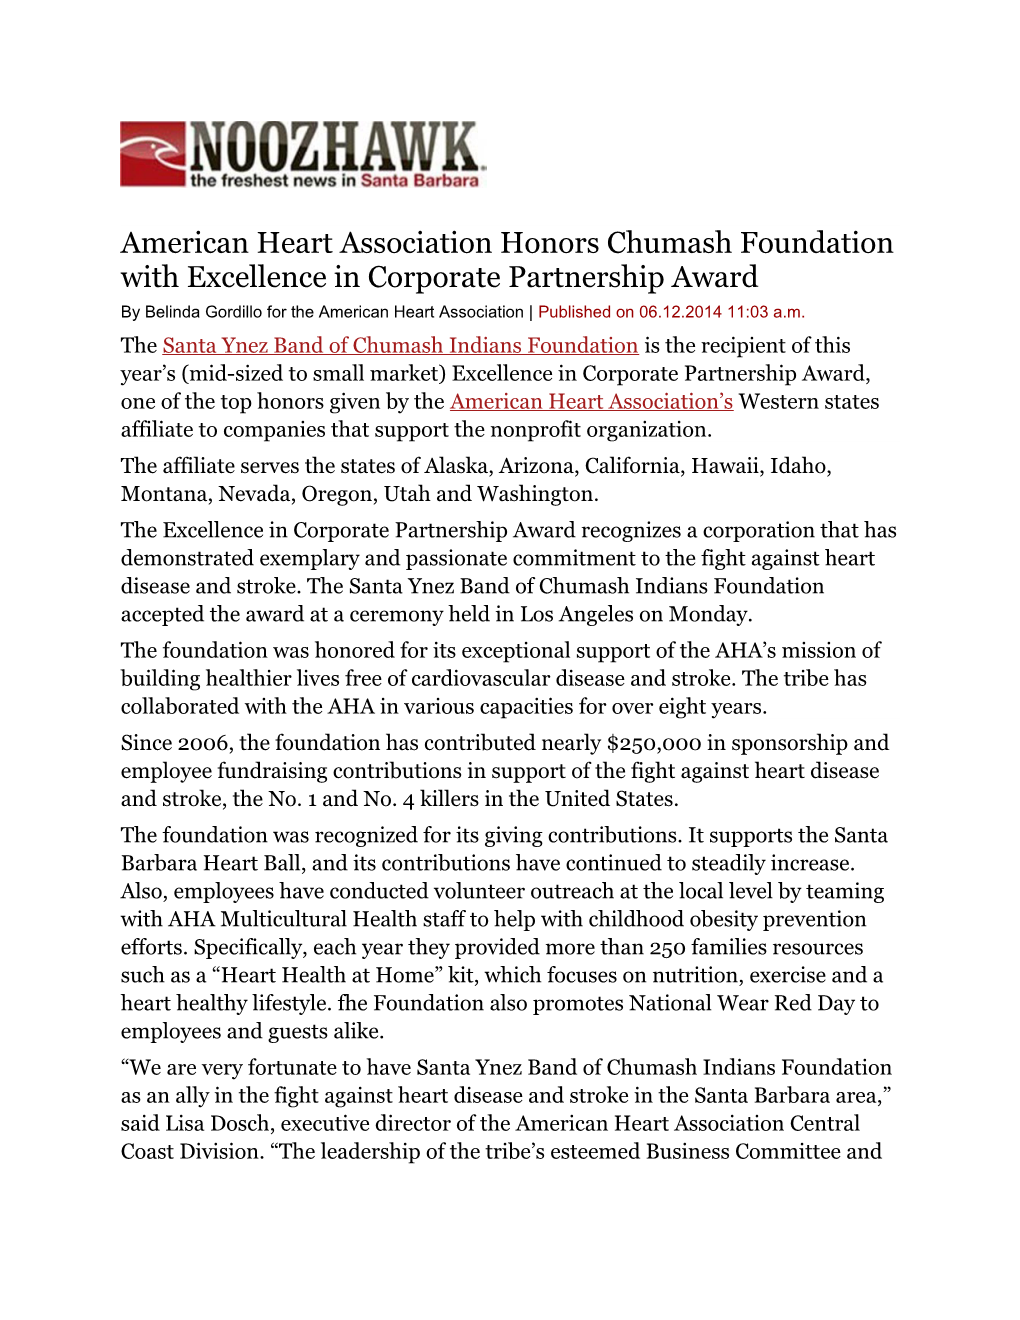 American Heart Association Honors Chumash Foundation with Excellence in Corporate Partnership